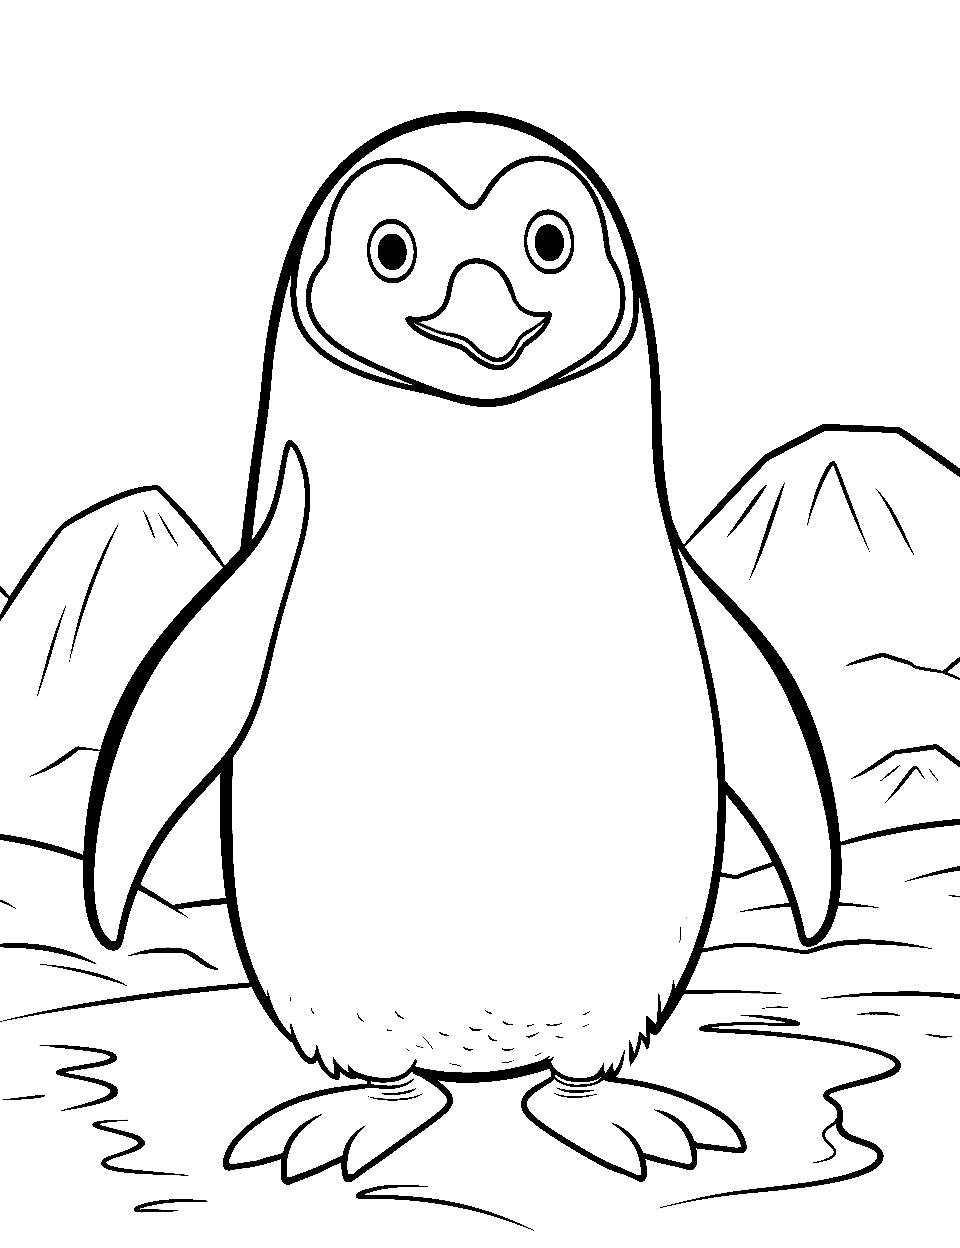 Penguin's Frosty Morning Coloring Page - A penguin waking up to a frost-covered ground.